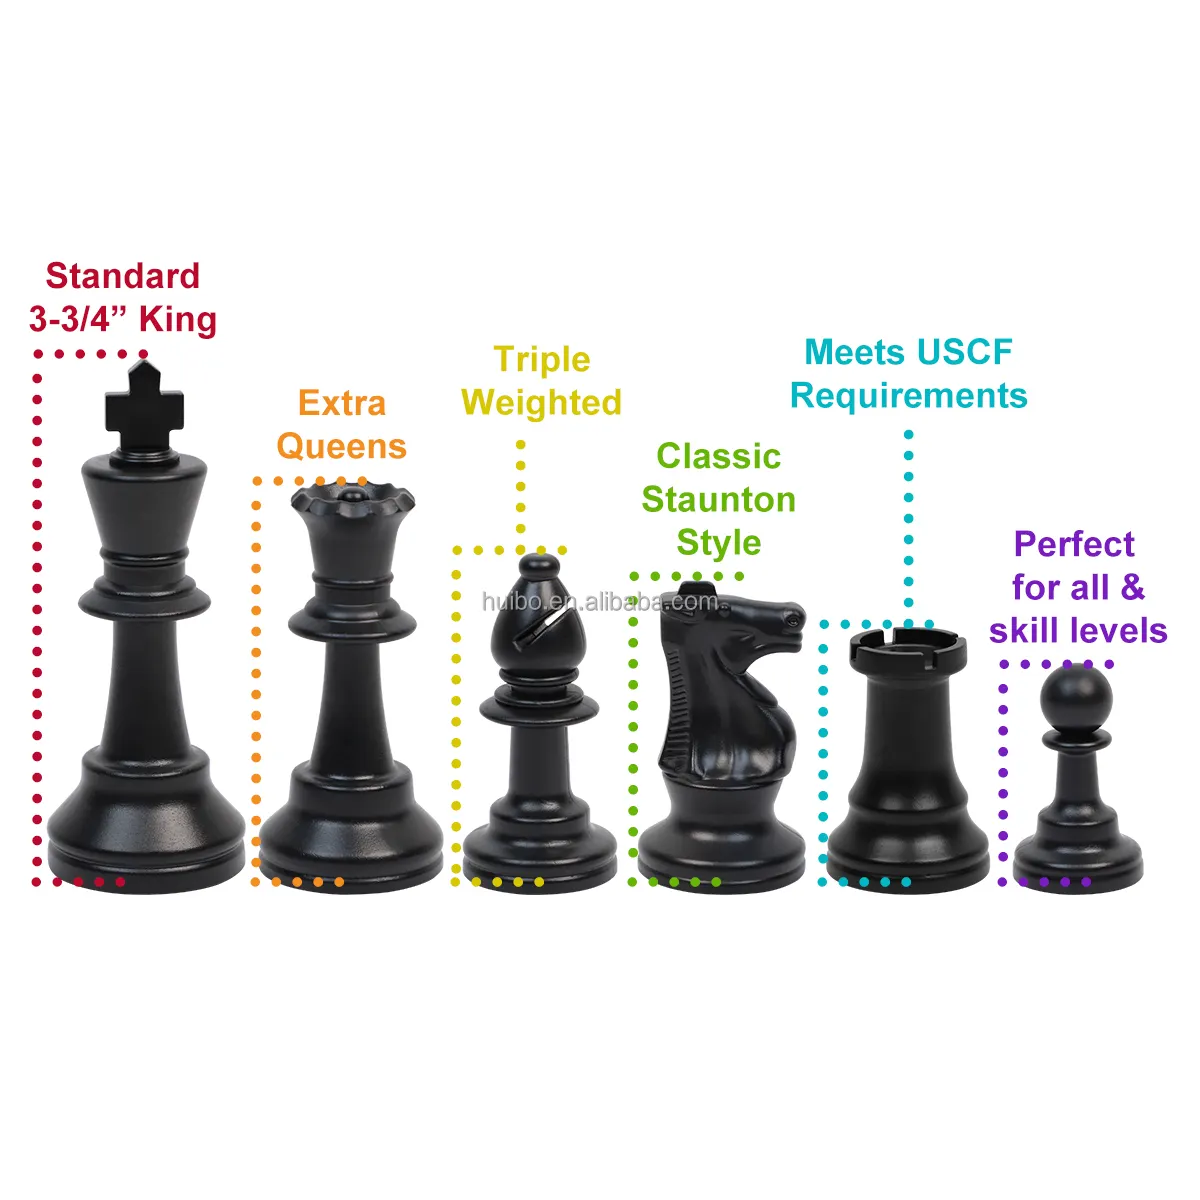 4" King 3lbs+ Triple Weighted Big Knight Plastic Chess Set 